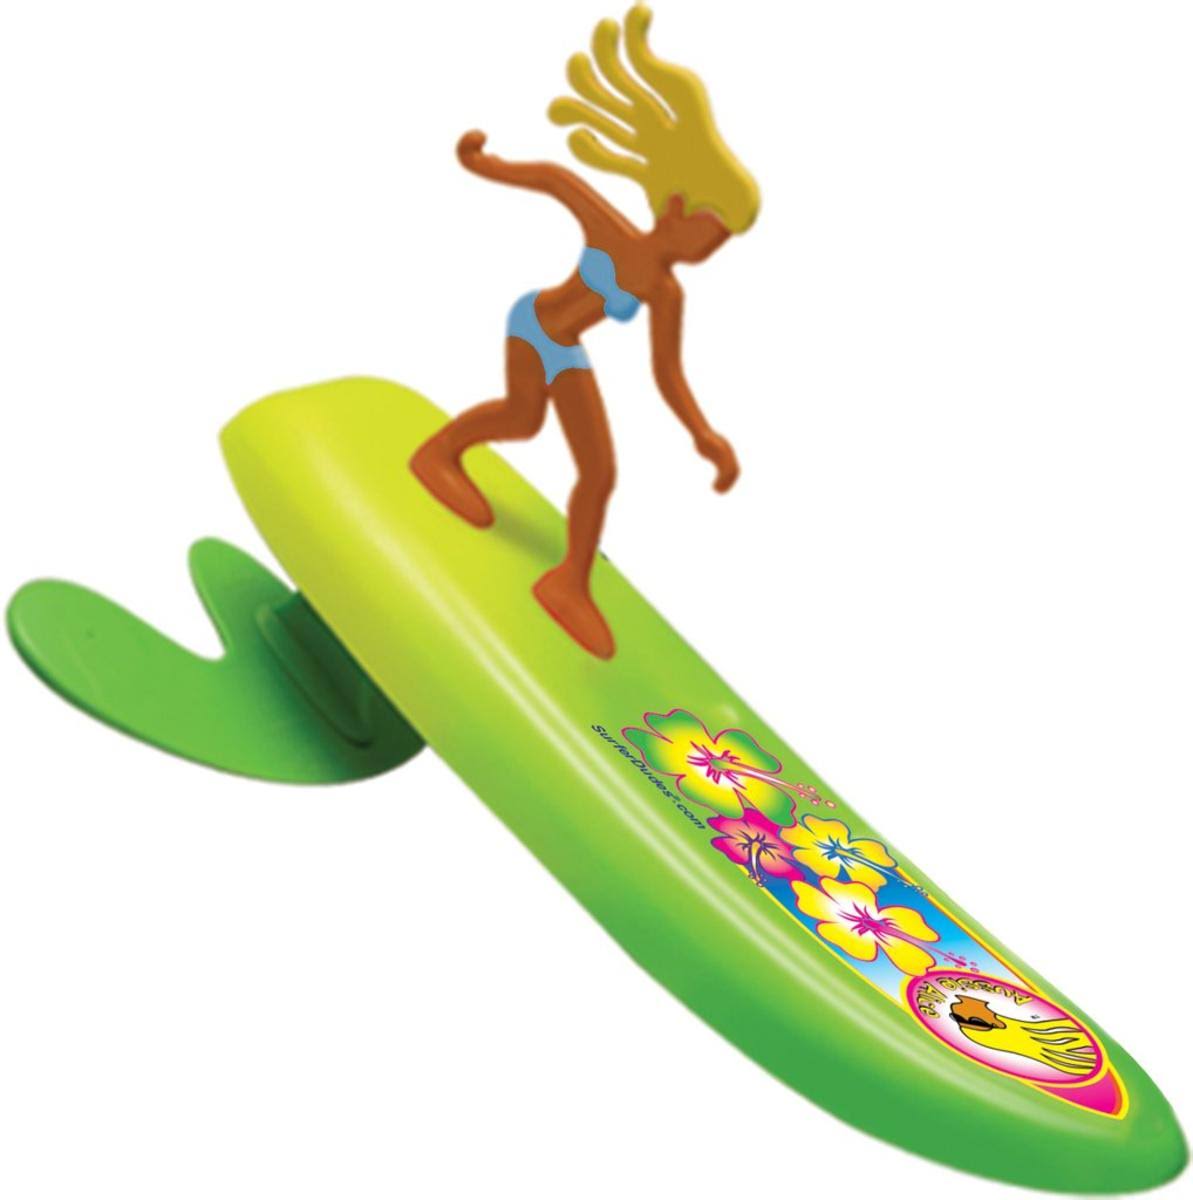 Surfer Dudes Wave Powered Mini-surfer and Surfboard Toy